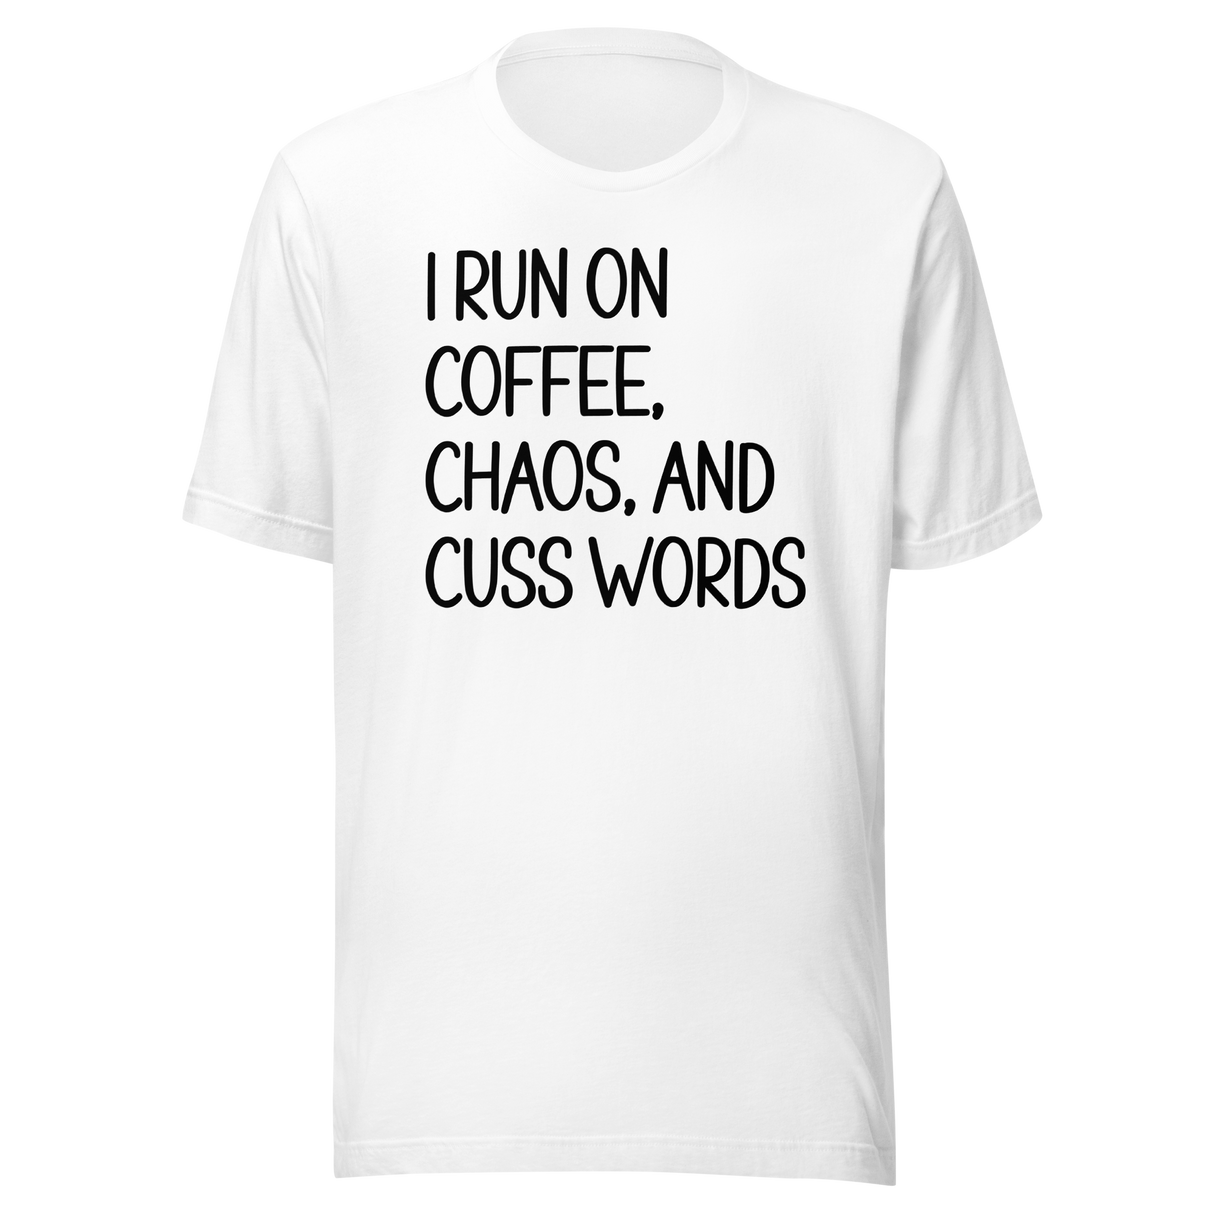 i-run-on-coffee-chaos-and-cuss-words-coffee-tee-life-t-shirt-coffee-tee-chaos-t-shirt-cuss-words-tee#color_white